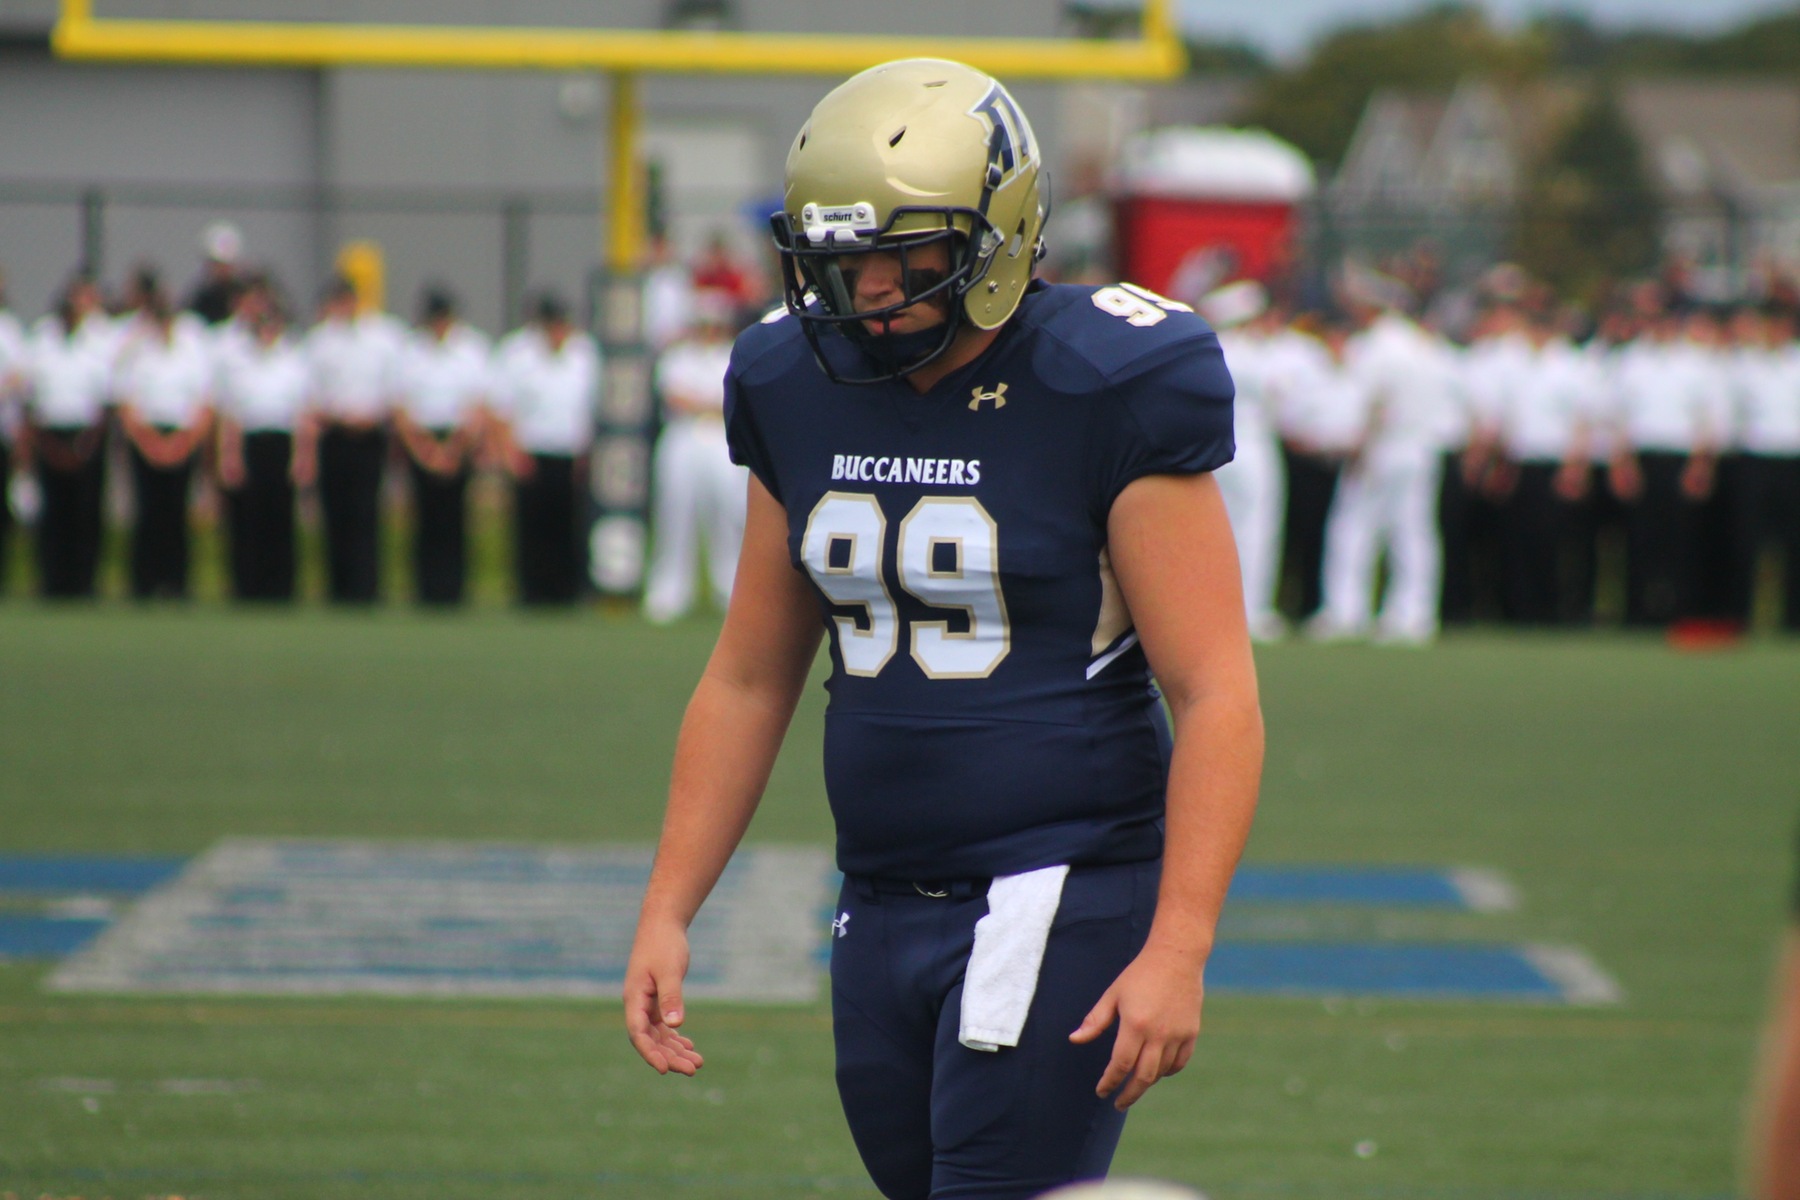 Lampros Named As MASCAC Football Rookie Of The Week